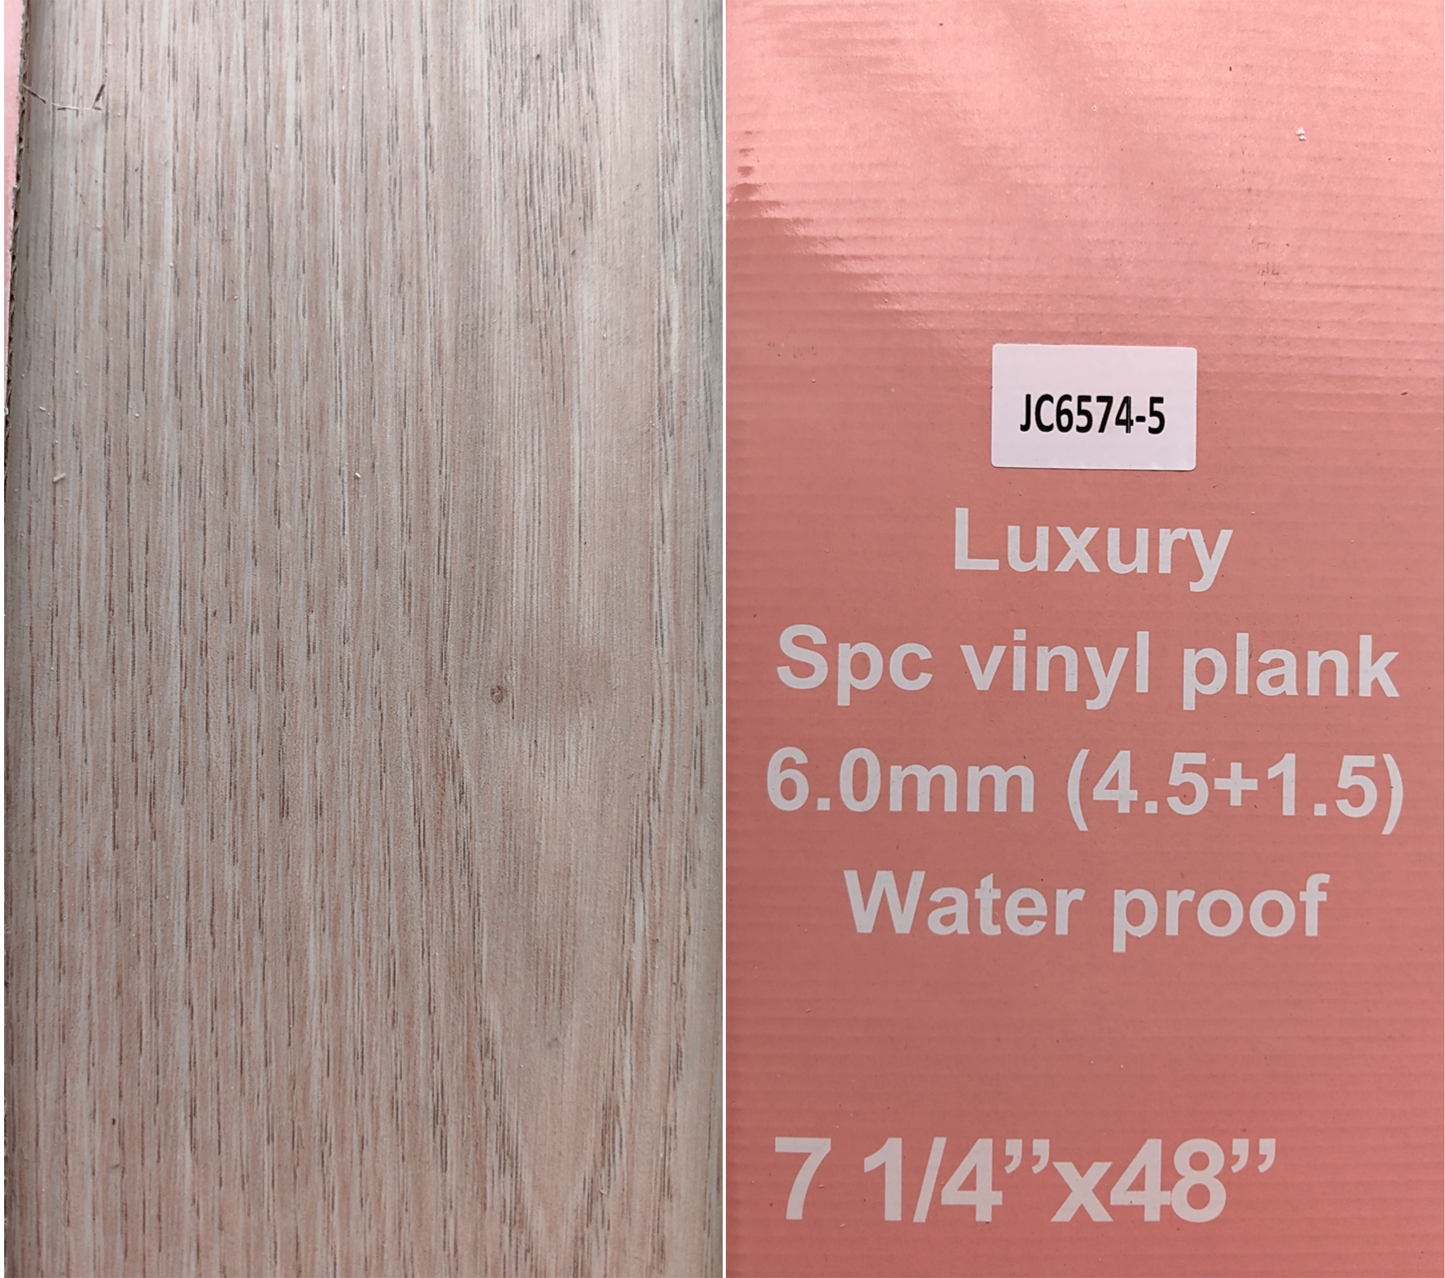 *PROMOTION* 6mm JC6574-5 (Vancouver Only) SPC Flooring vinyl with UV Coating180x1220mm+(4.5mm+1.5mm pad) 25sf/box $1.49/sf